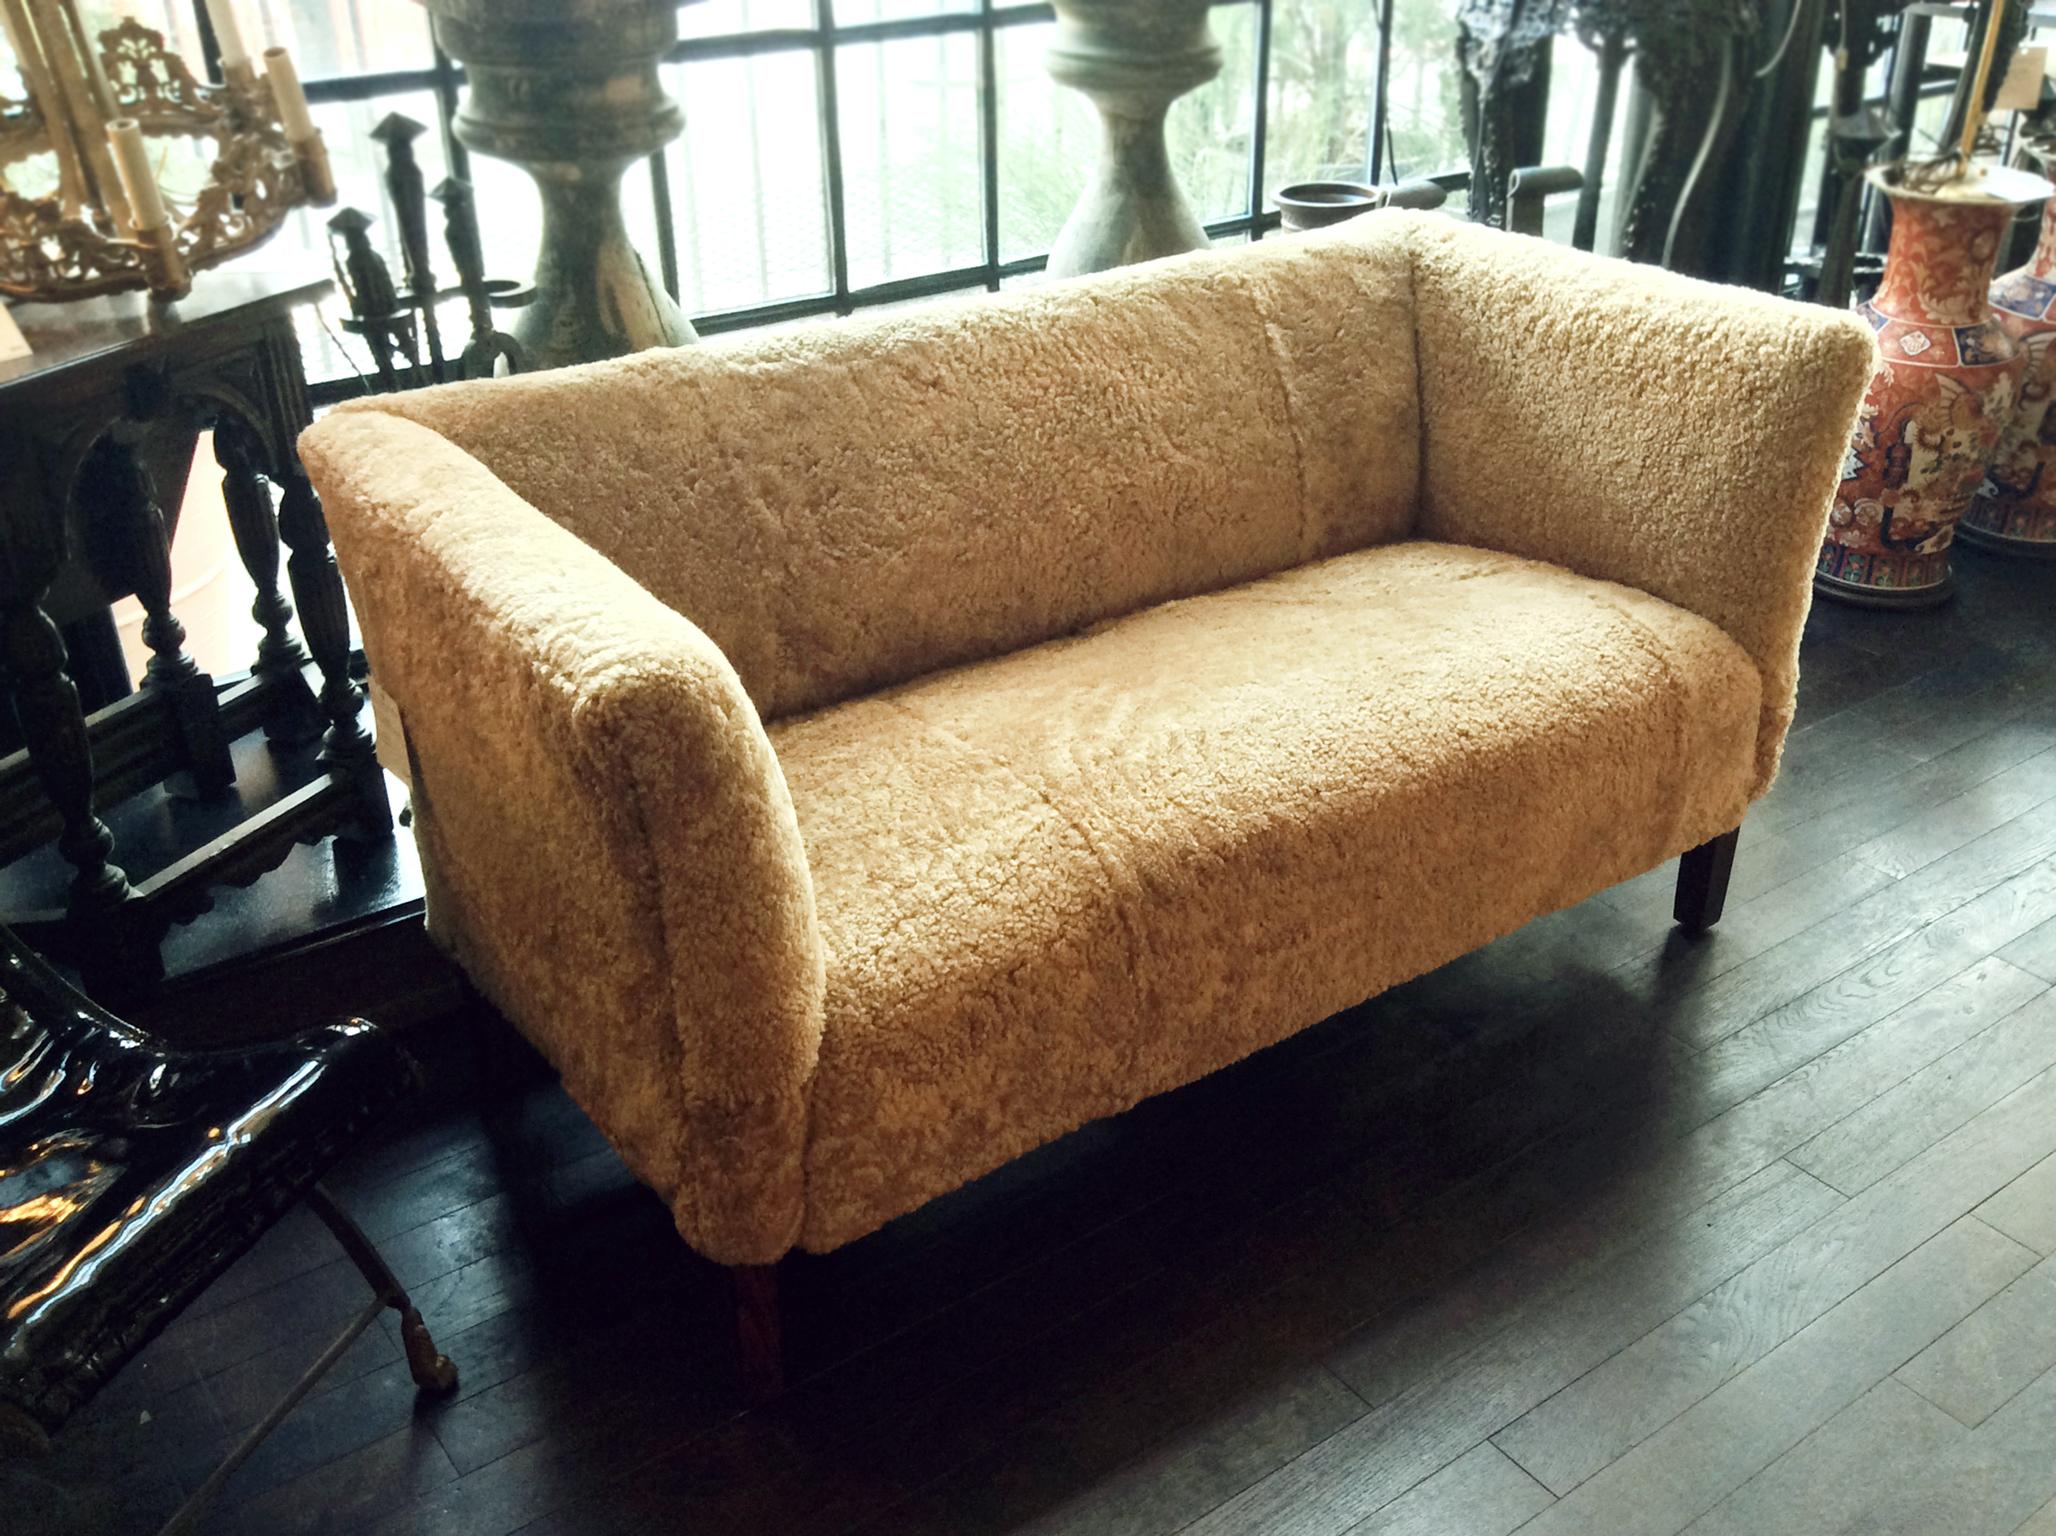 A Danish modern settee sofa designed by Børge Mogensen, manufactured circa 1950s. The settee has been completely reupholstered in a custom honey-toned shearling from Skandilock. This sheepskin is a soft curly texture that accentuates the settee's